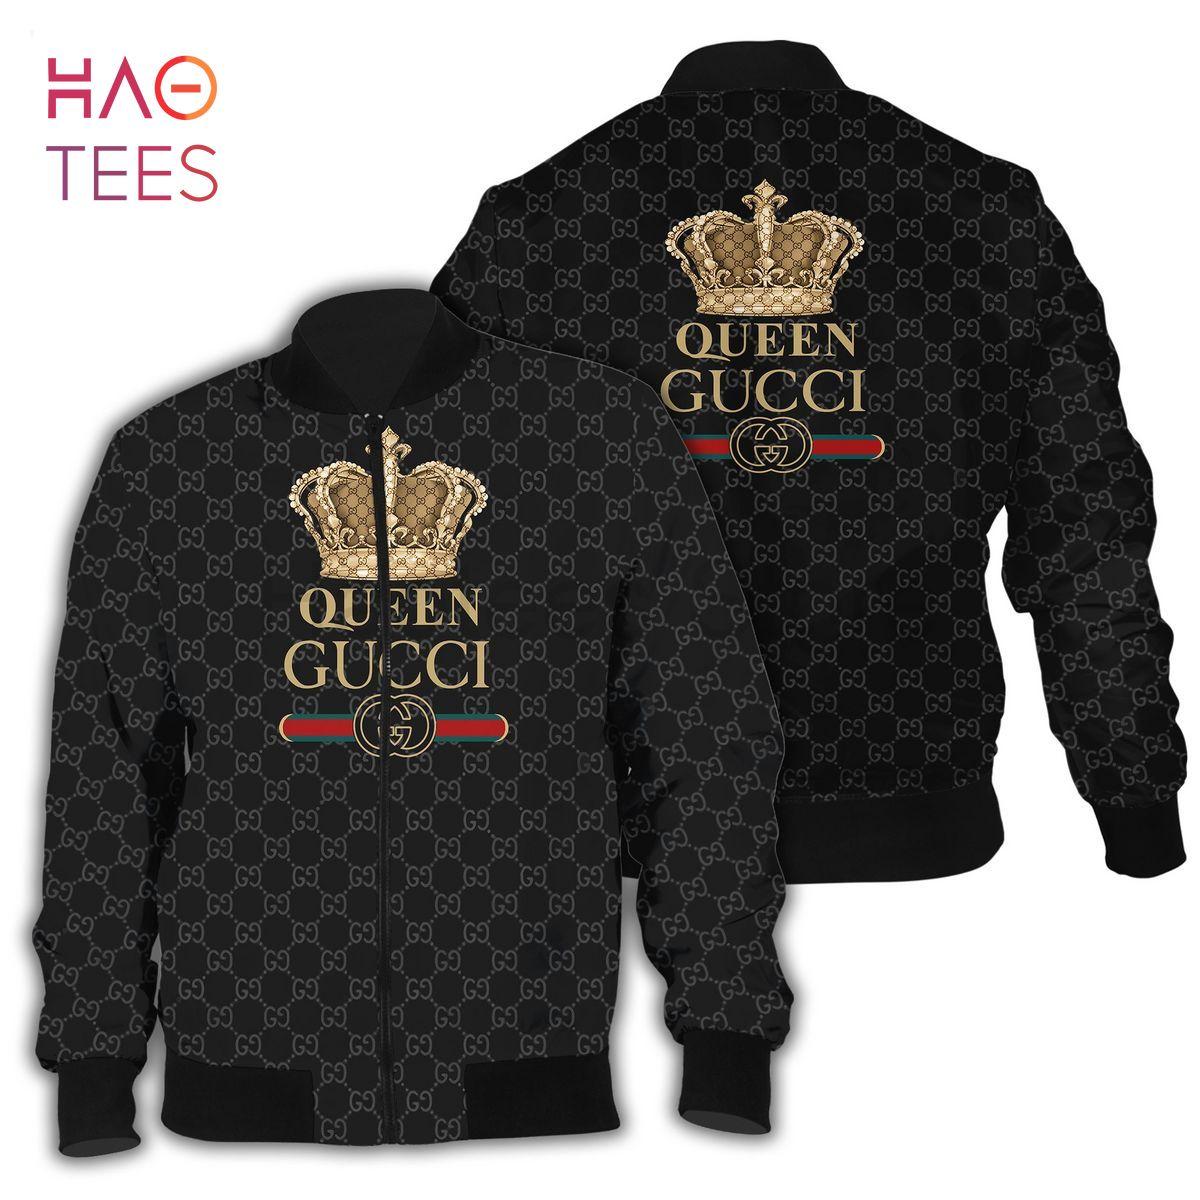 Gucci Queen Black imited Edition Bomber Jacket